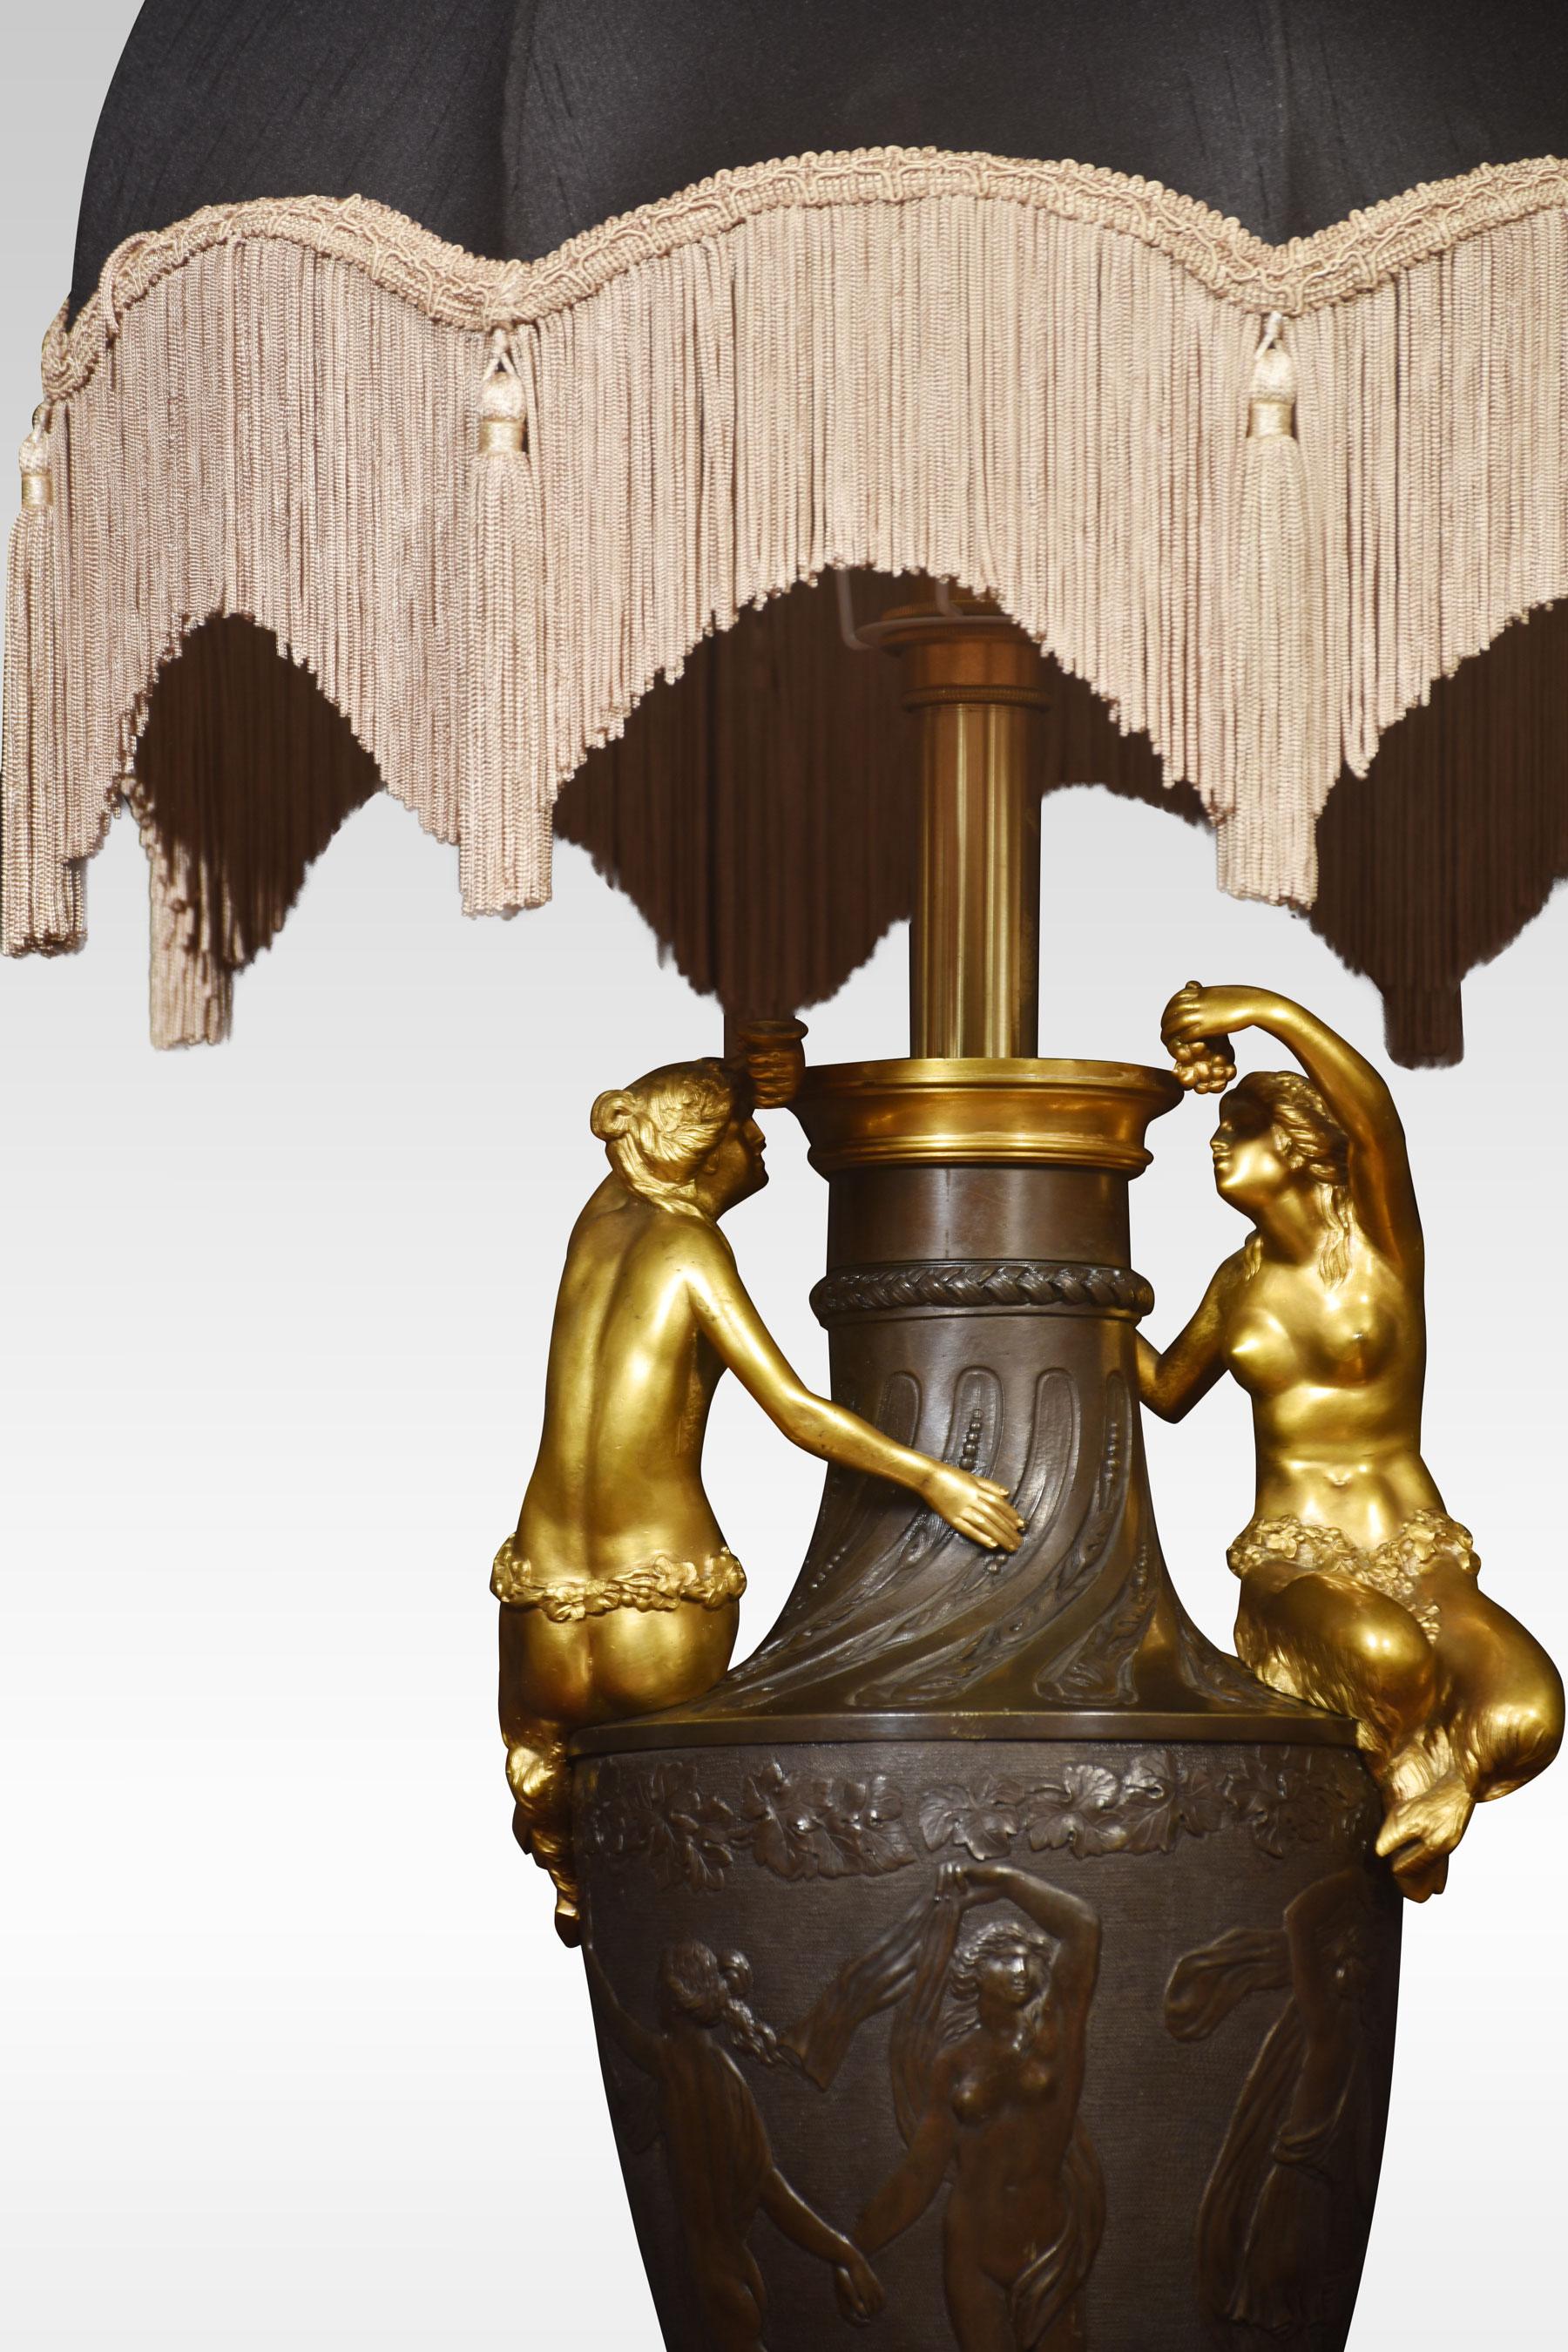 Gilt bronze table lamp, The circular lighting stem above urn-shaped body cast with figures and mounted with female satyrs. All raised up on turned stem and platform base.
Dimensions
Height 26 inches
Width 11 inches
Depth 8 inches.